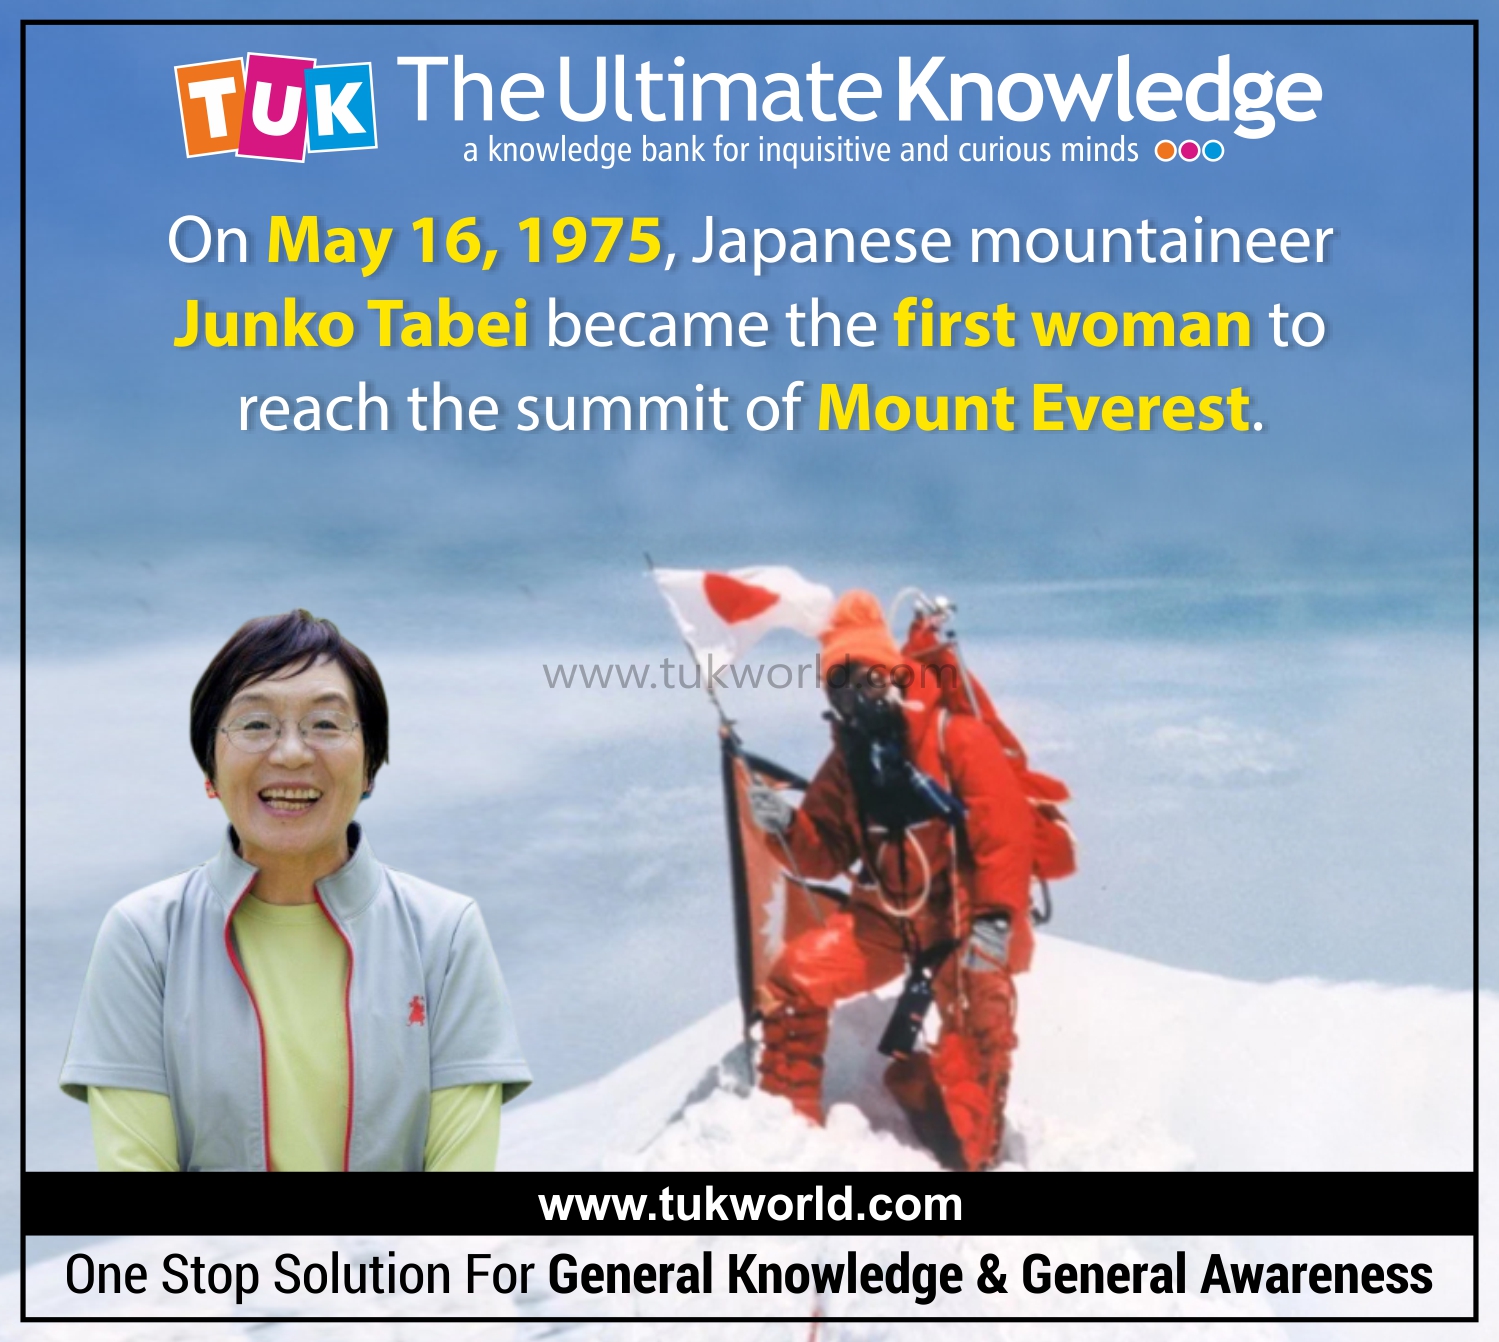 The Ultimate Knowledge 'TUK' on Twitter: "#TUK #TheUltimateKnowledge #TUKBuster #DidYouKnow - On May 16, 1975, #Japanese mountaineer 𝐉𝐮𝐧𝐤𝐨 𝐓𝐚𝐛𝐞𝐢 became the first woman to reach the summit of #MountEverest. #ThisDayInHistory #OnThisDay ...